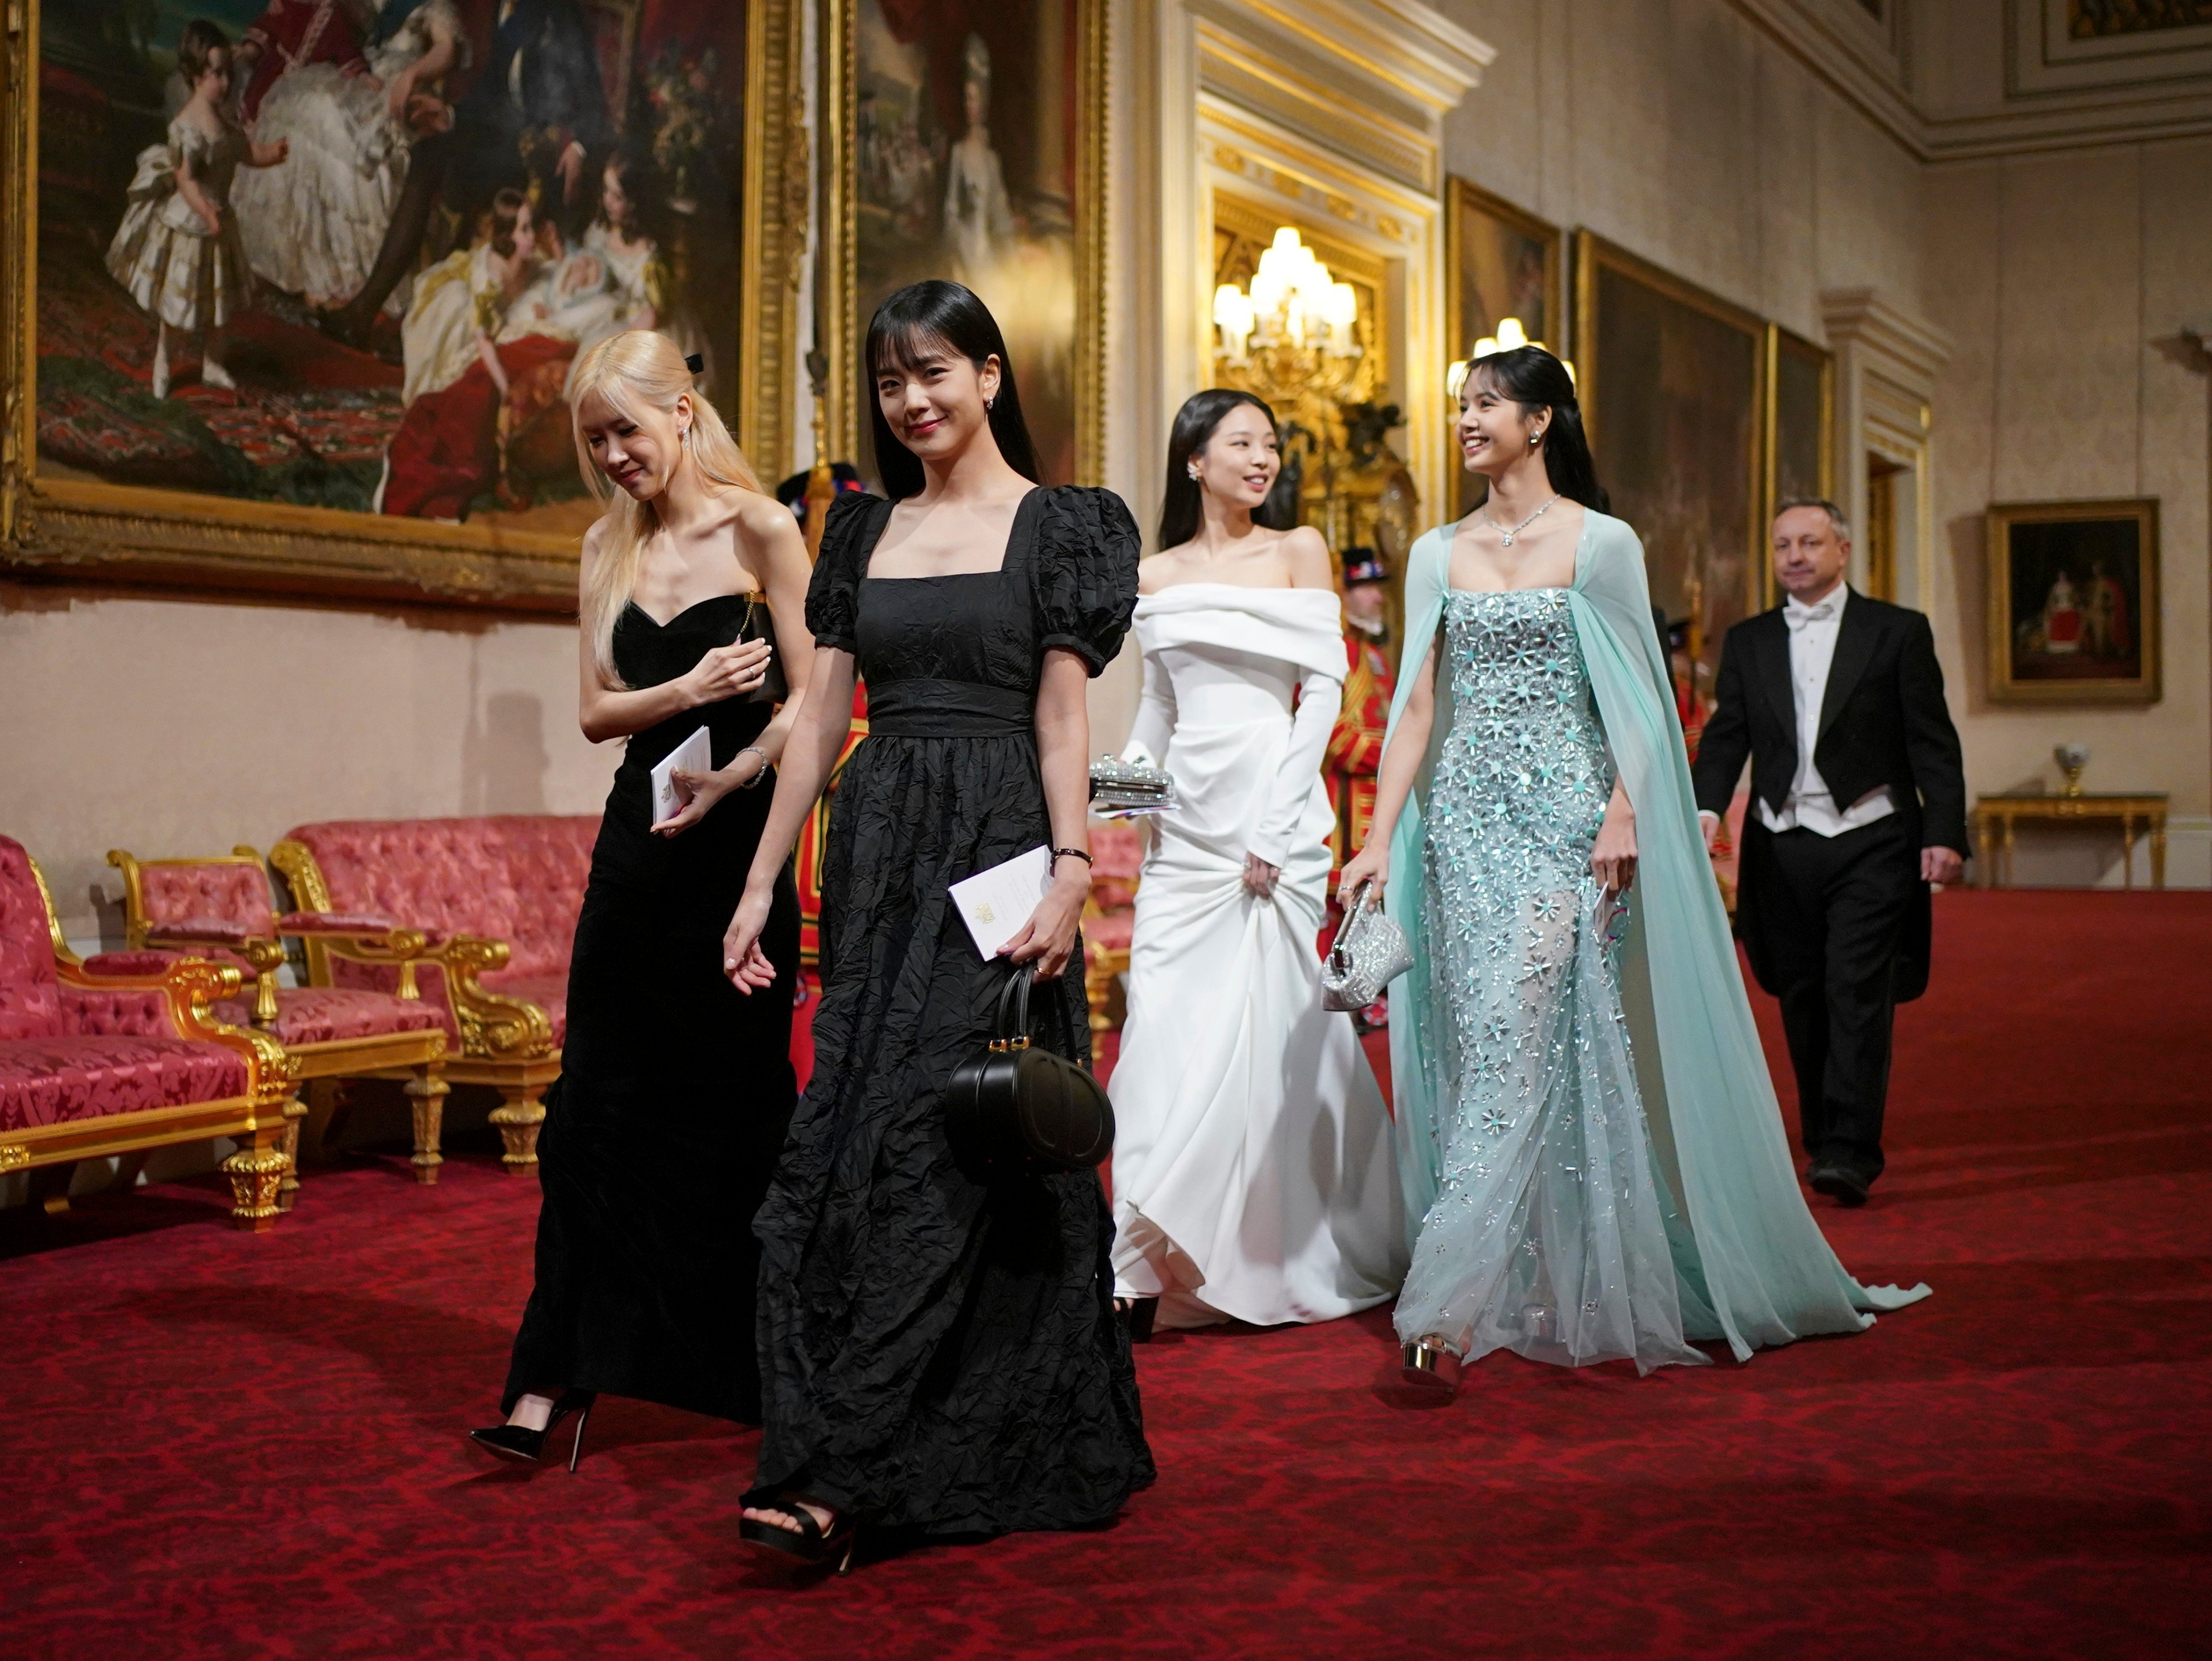 Blackpink’s Jisoo, Jennie, Lisa and Rosé attended a state banquet at Buckingham Palace in honour of a diplomatic visit by South Korean President Yoon Suk-yeol, with William and Kate, and British Prime Minister Rishi Sunak also in attendance. Photo: AP